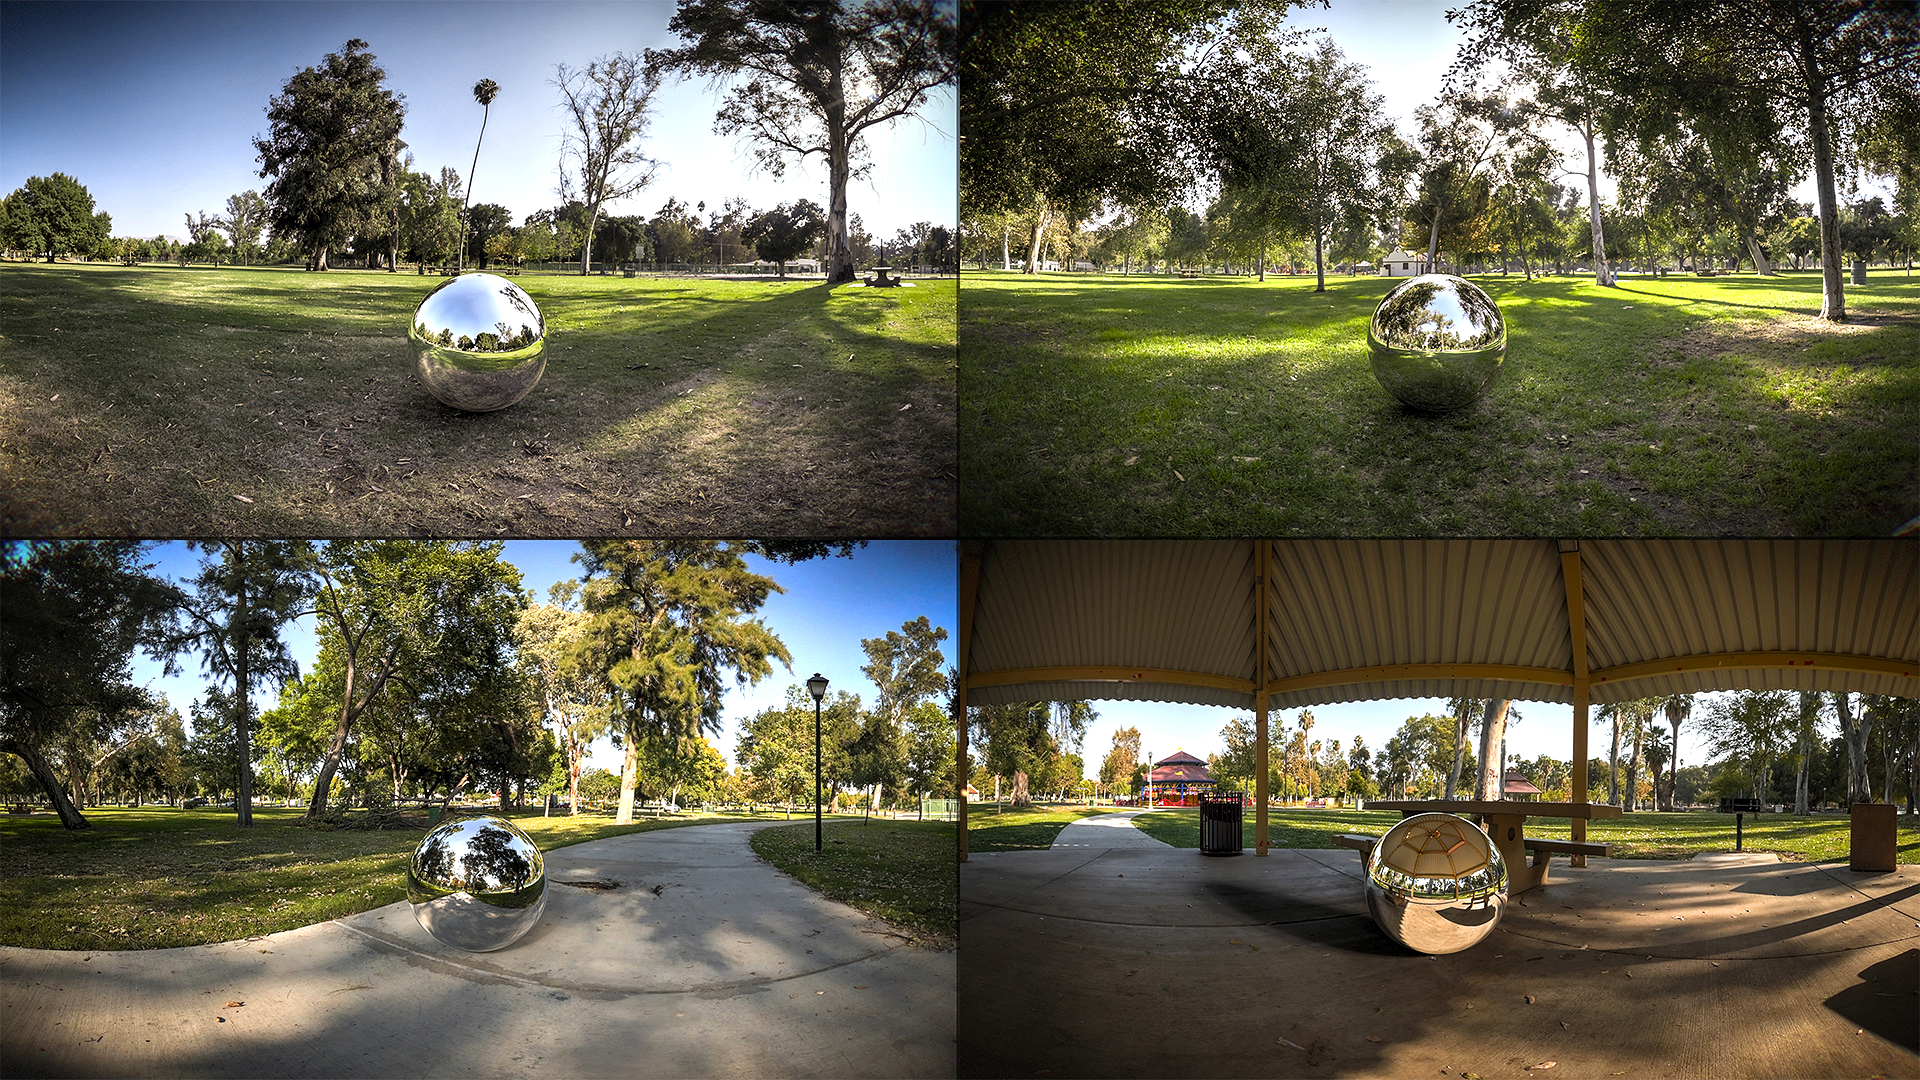 iRadiance HDR Resources - Parks and Rec Vol 1 by: DimensionTheory, 3D Models by Daz 3D